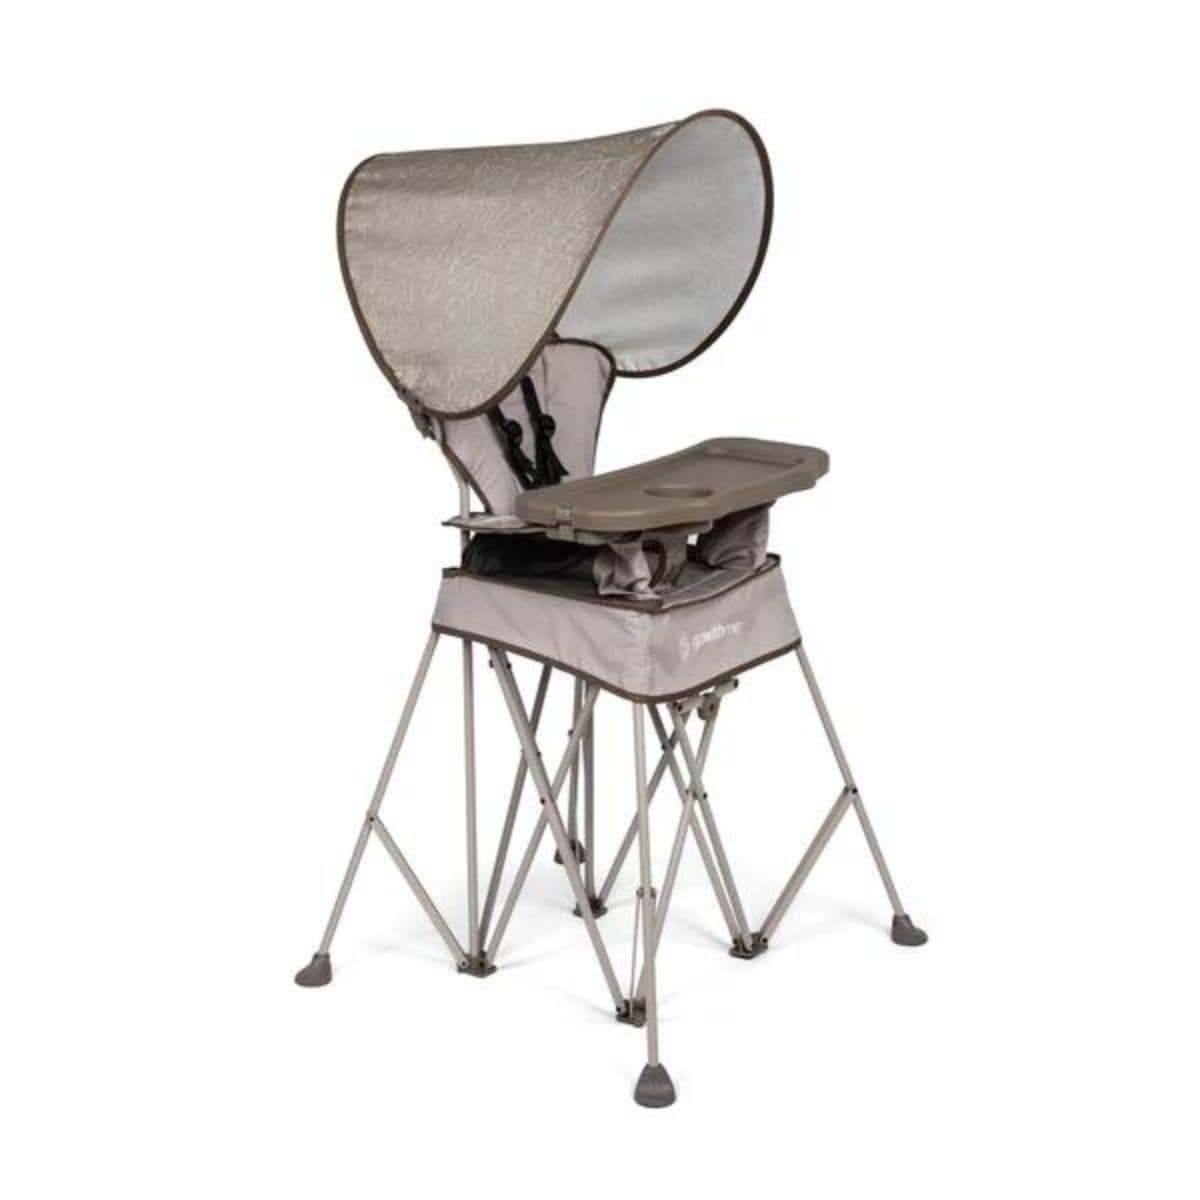 Go With Me Uplift Deluxe Portable High Chair with Canopy, 819956001630 - ANB Baby